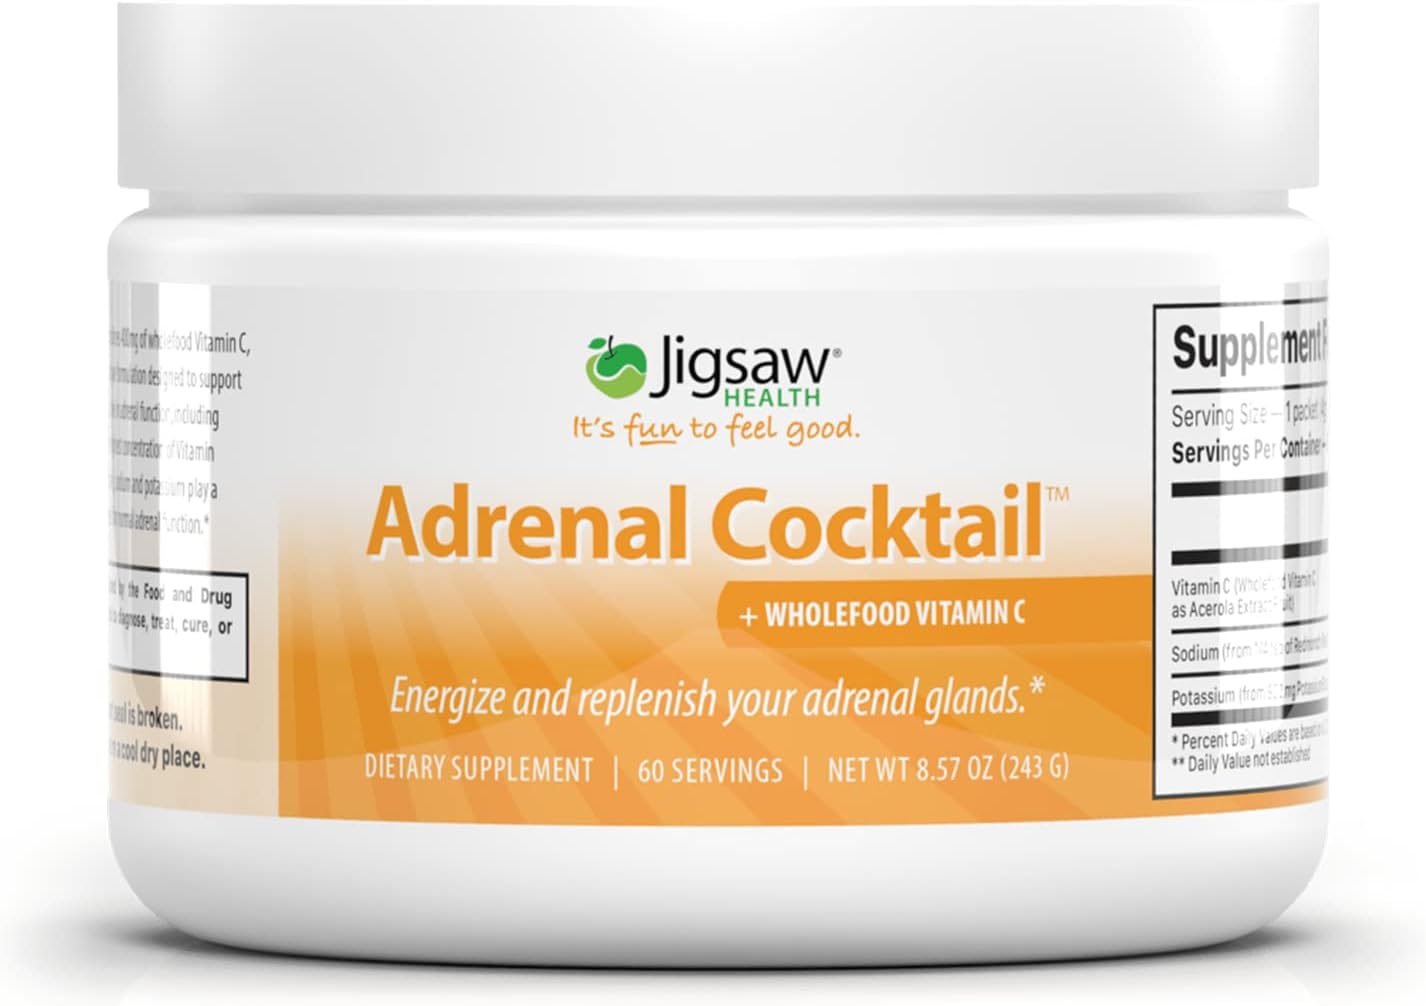 Jigsaw Health Adrenal Cocktail with Whole-Food Vitamin C, 60 Servings8.57 Ounces